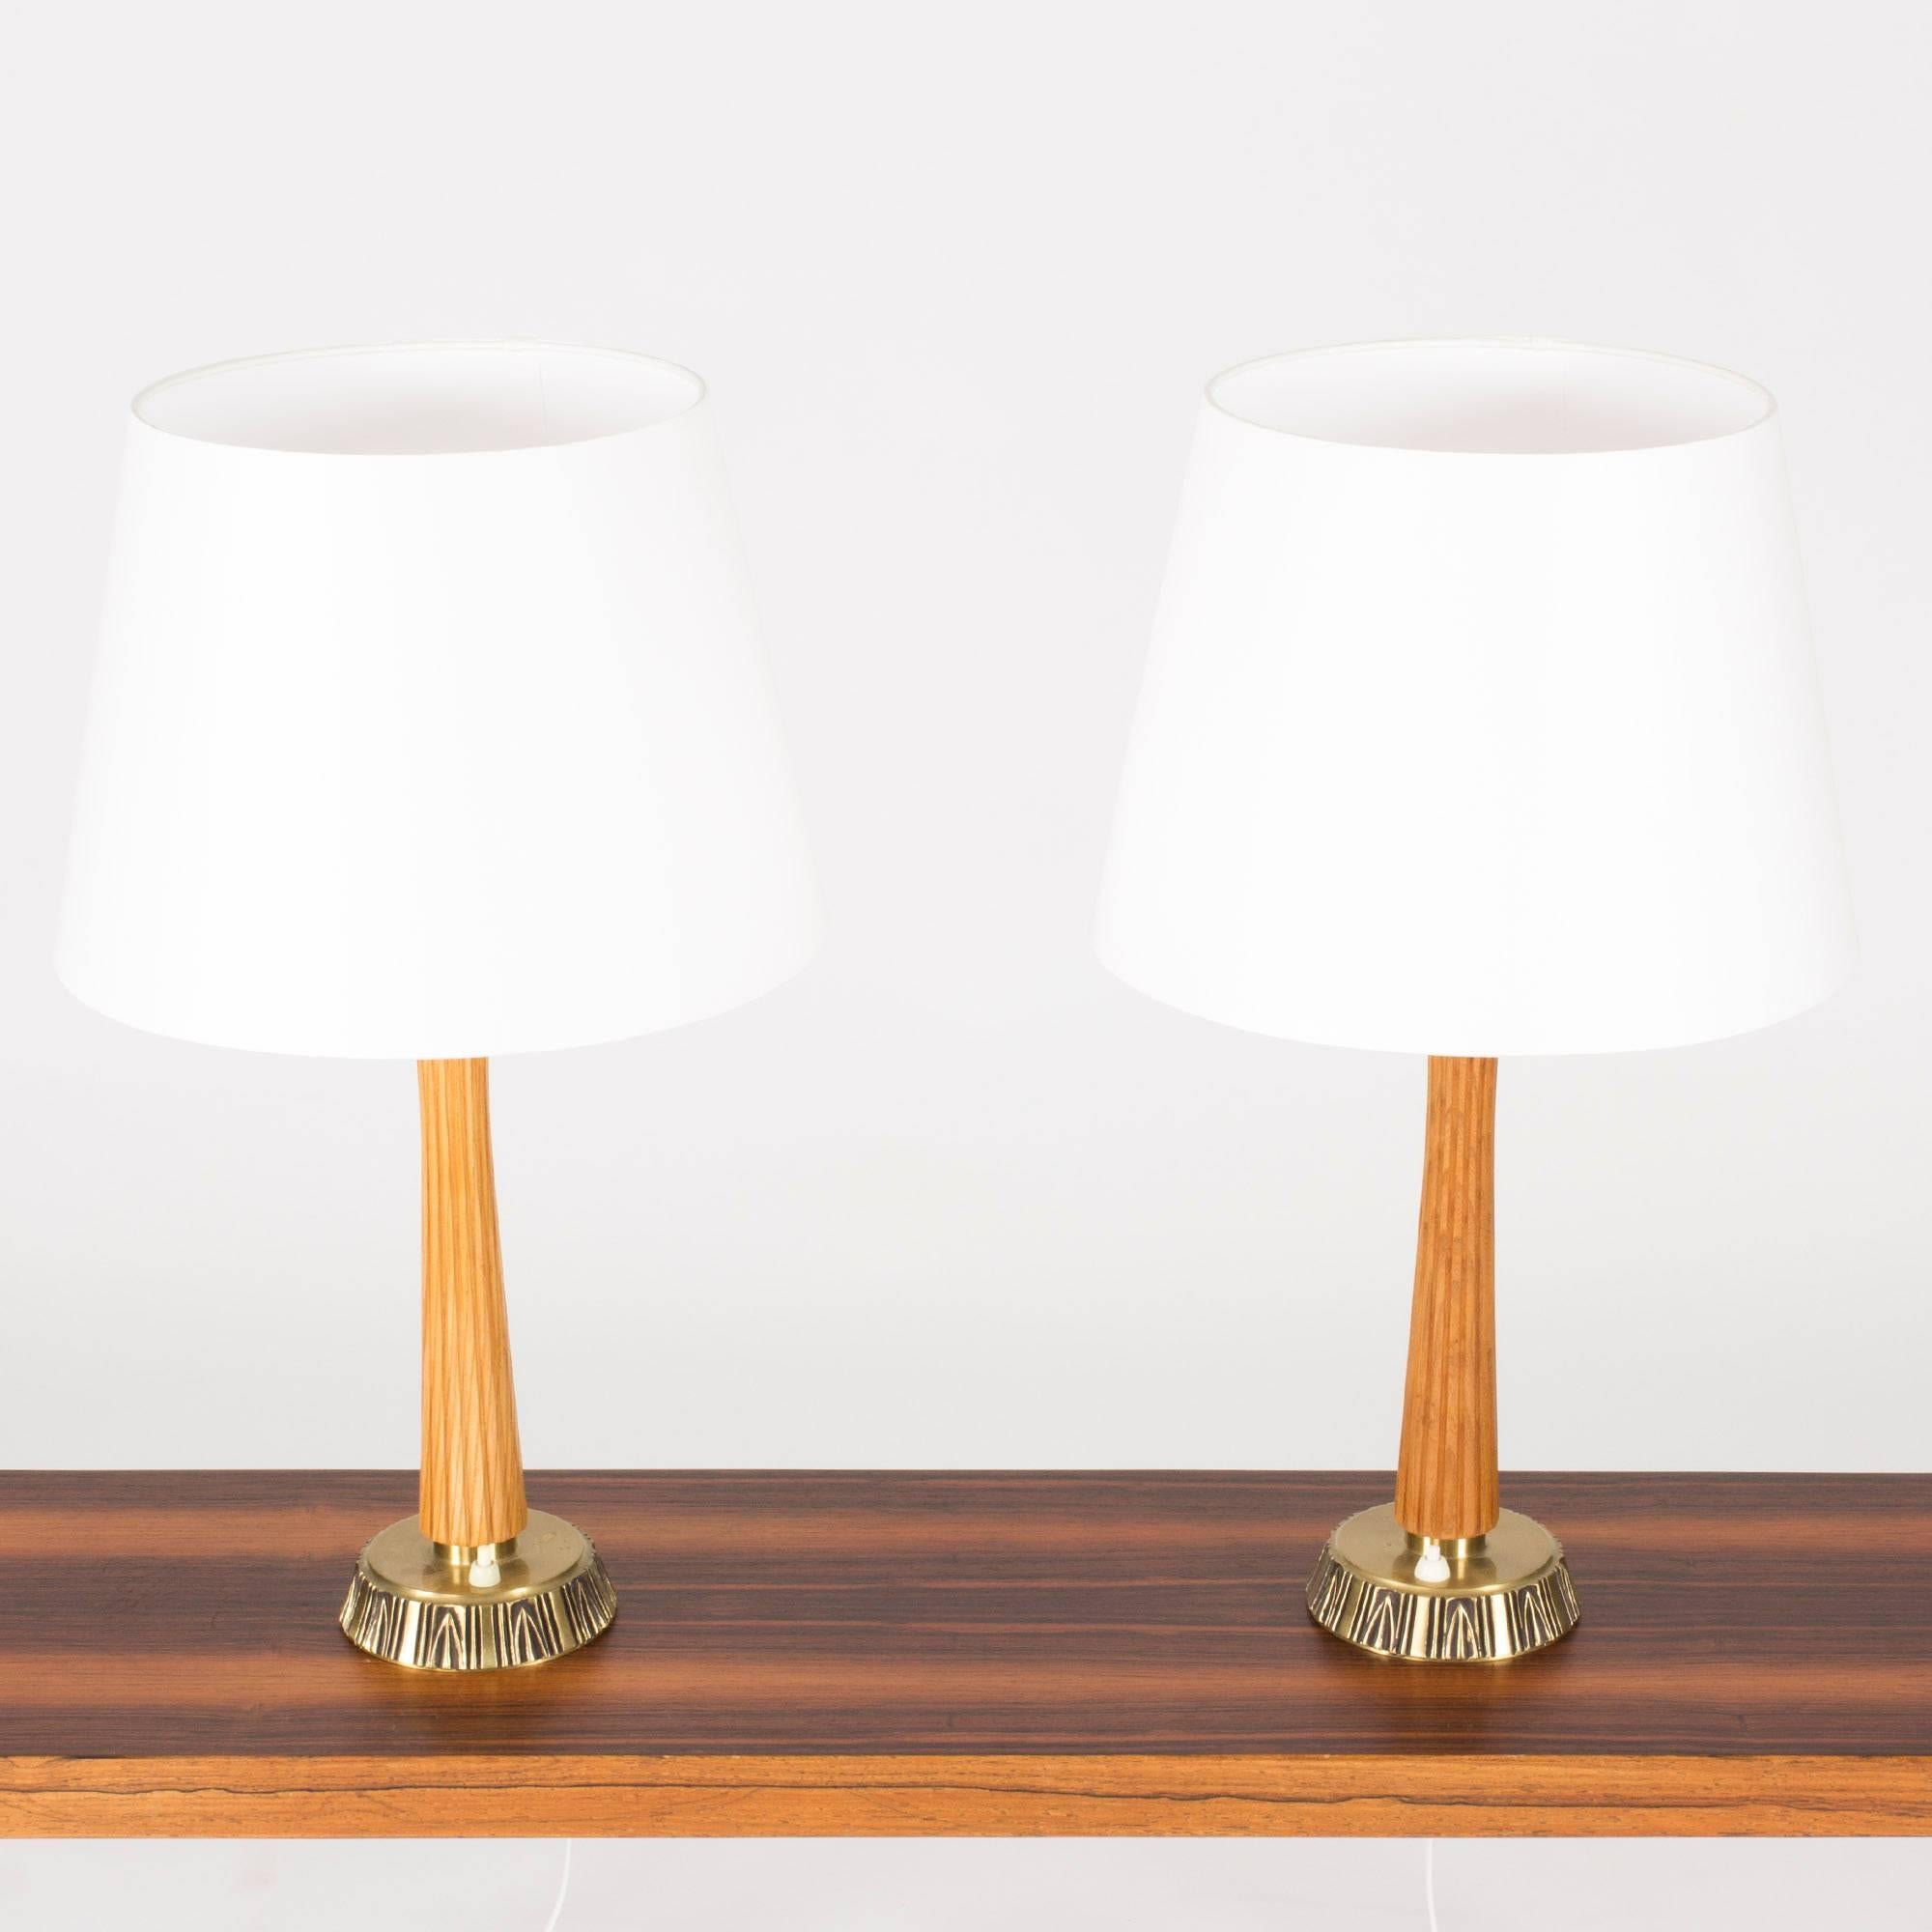 Pair of table lamps by the sculptor Sonja Katzin for ASEA. Handles made from teak with a carved pattern of vertical stripes, bases made from brass with a pattern with ethnic influences.